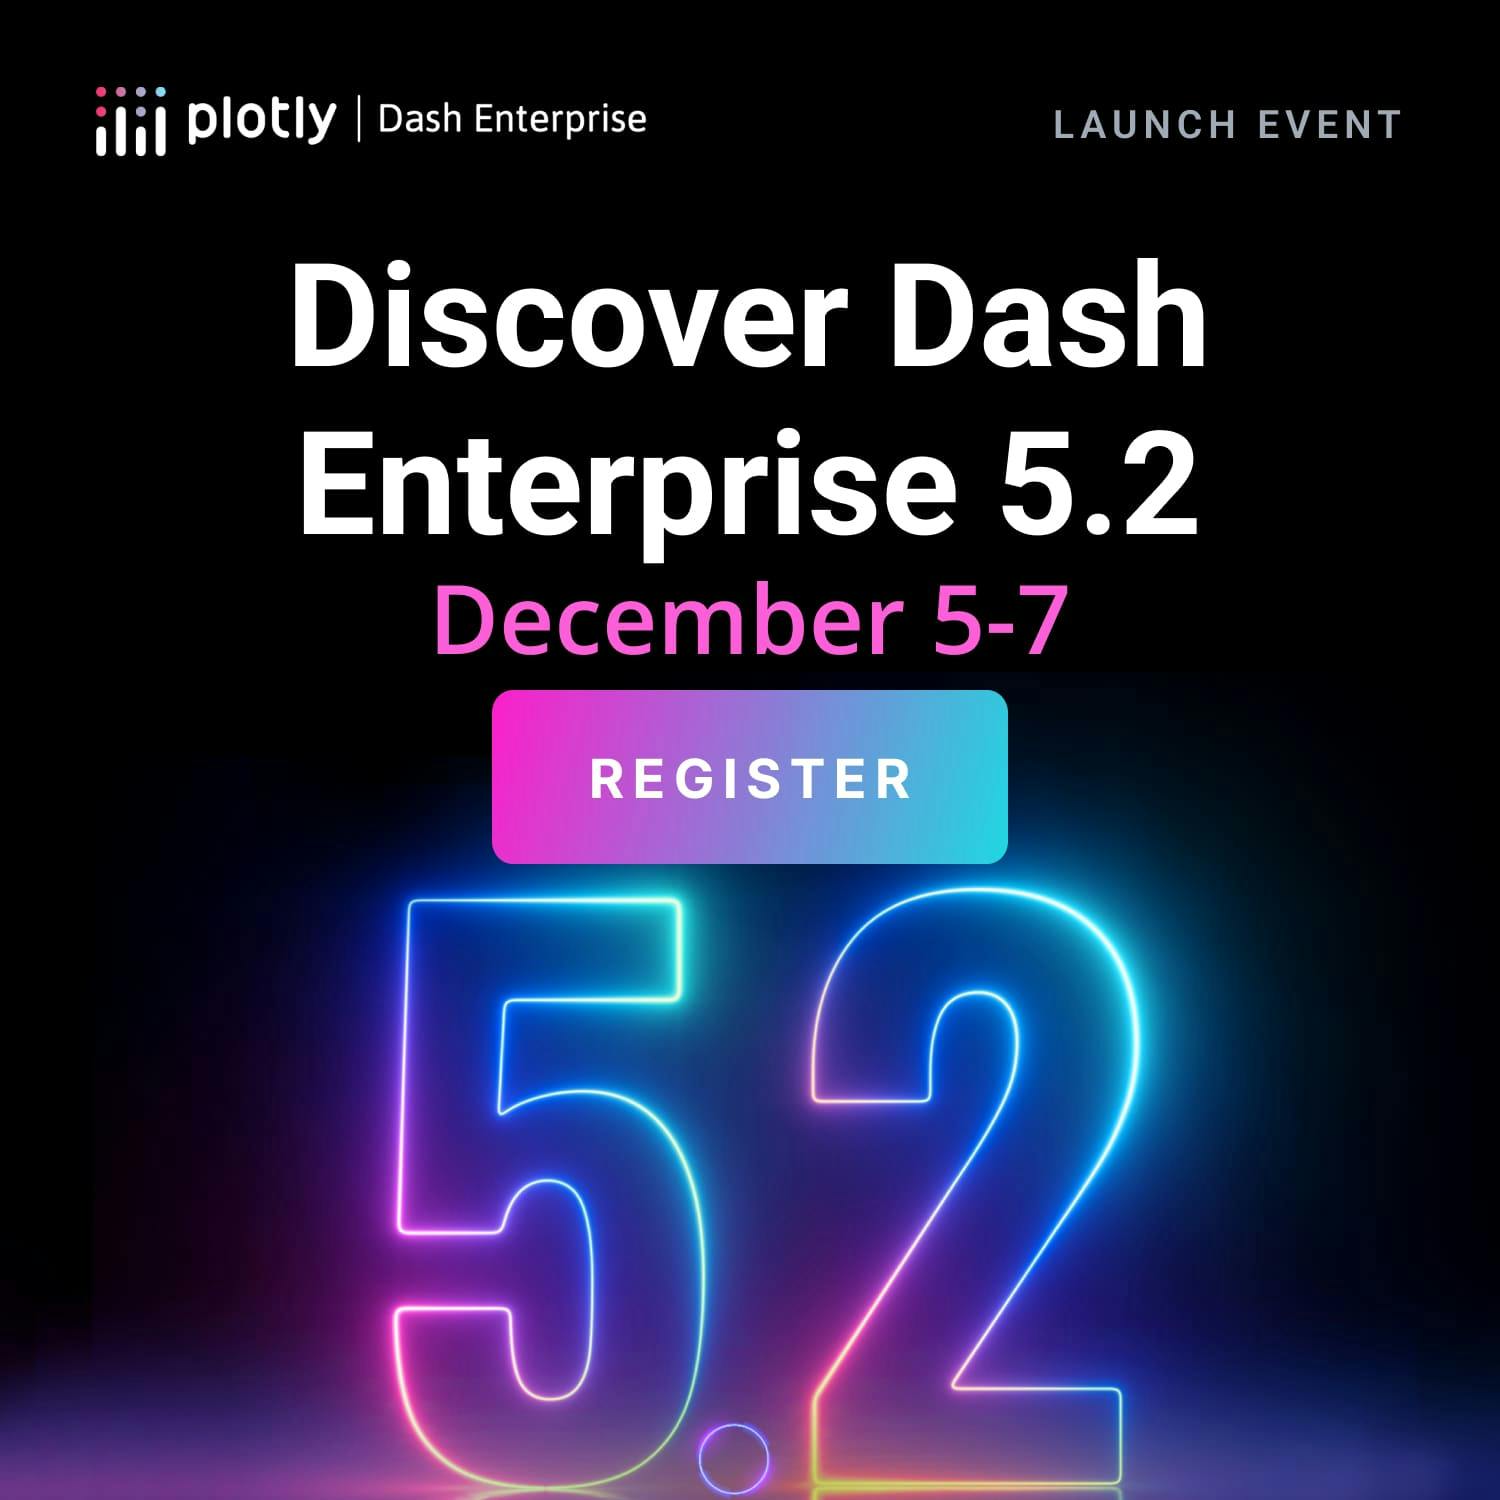 Discover Dash Enterprise 5.2: Register for the three-day launch event